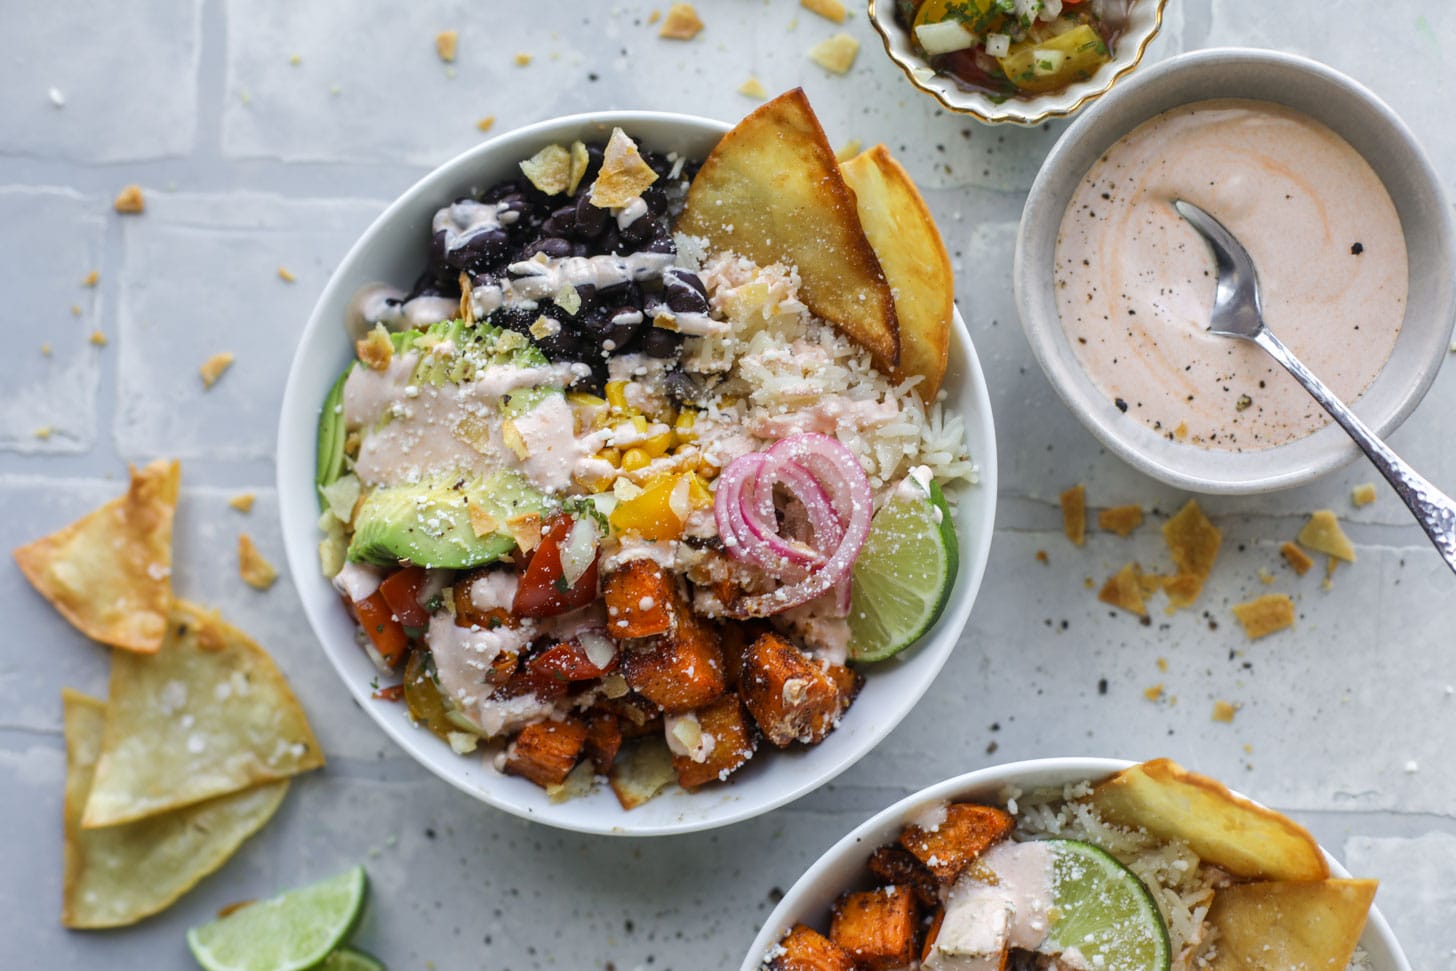 chili lime sweet potato taco bowls with chipotle ranch